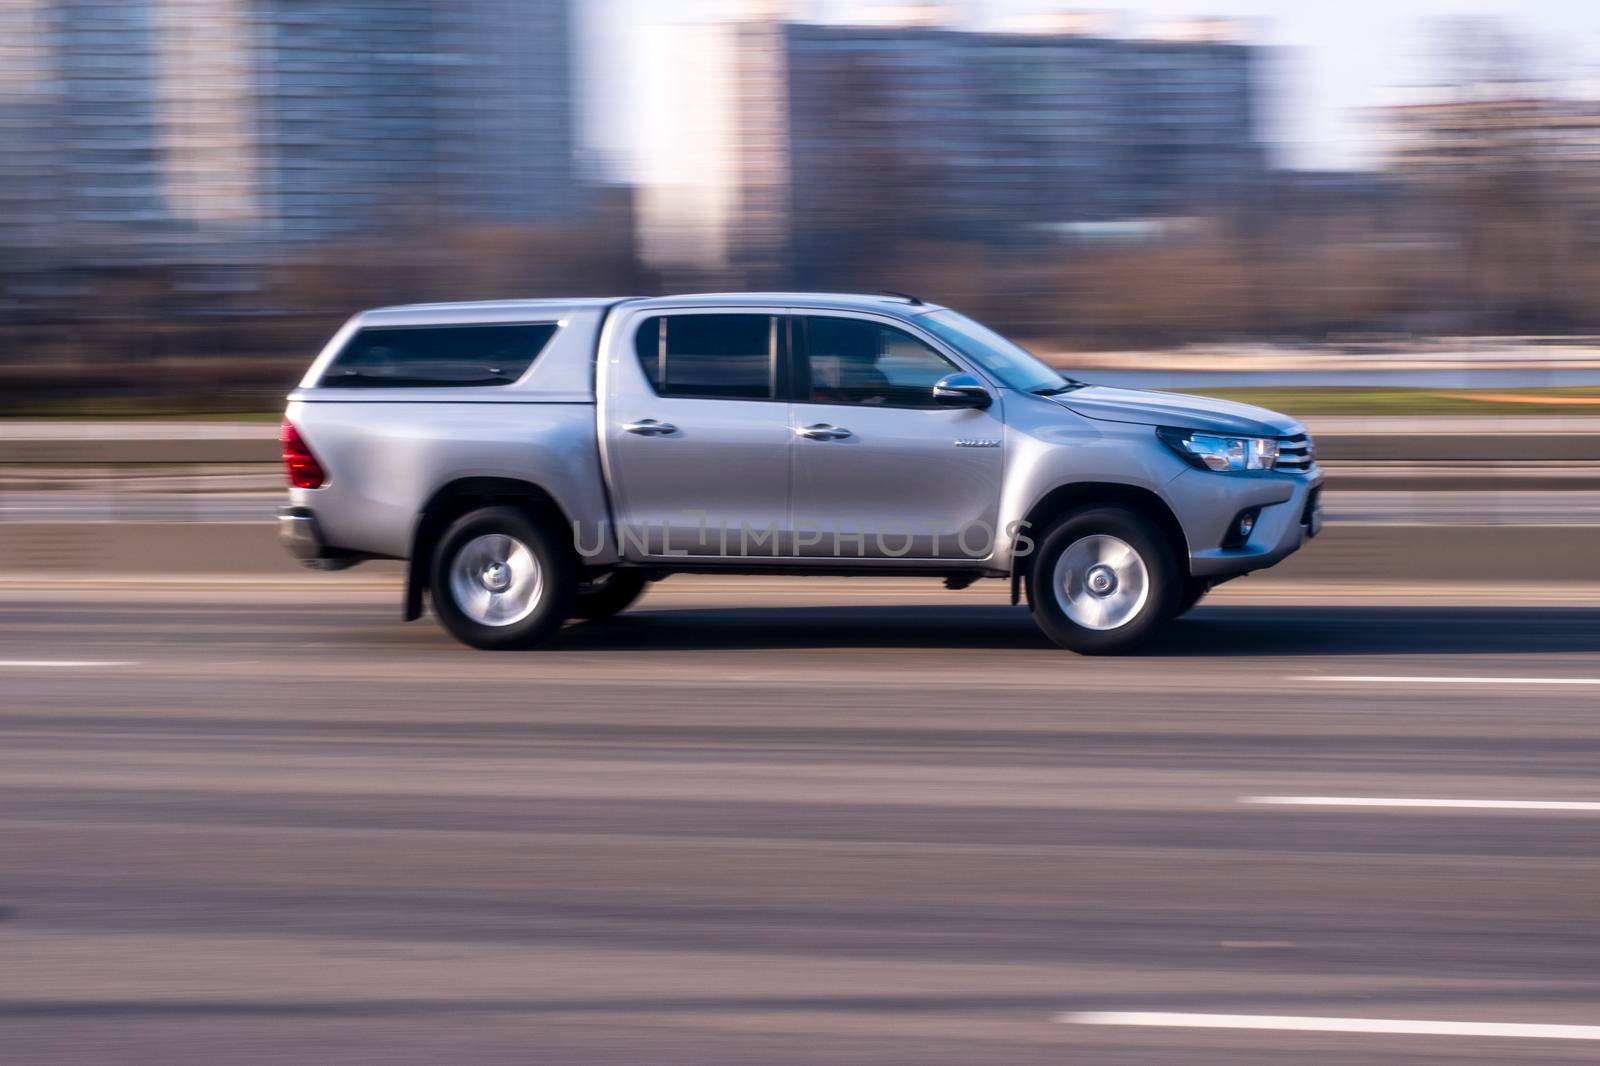 Ukraine, Kyiv - 21 March 2021: Silver Toyota Hilux car moving on the street. Editorial